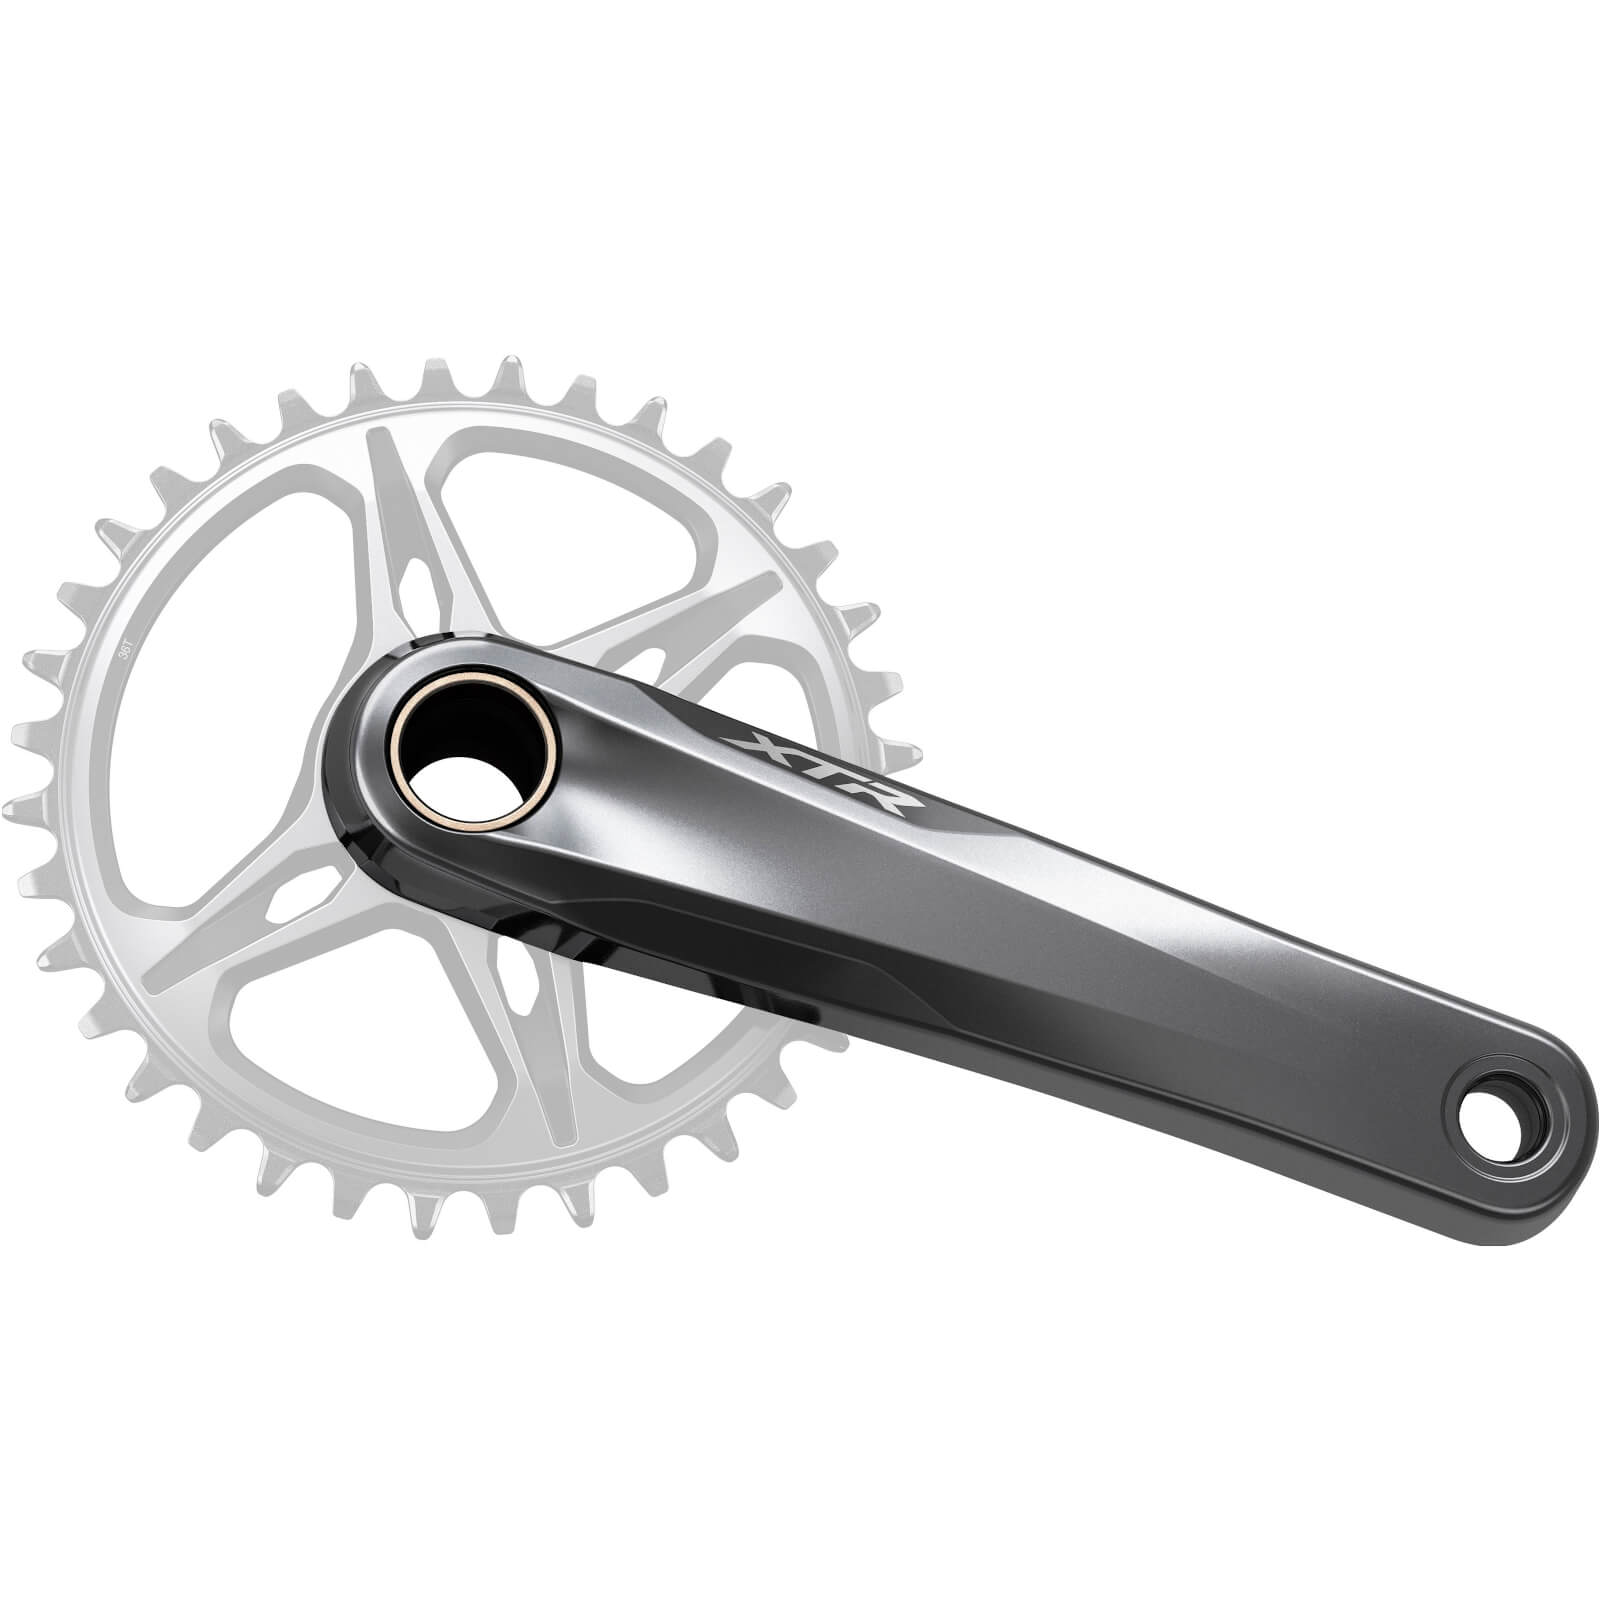 Shimano XTR M9100 Crankset without Chainring - 165mm